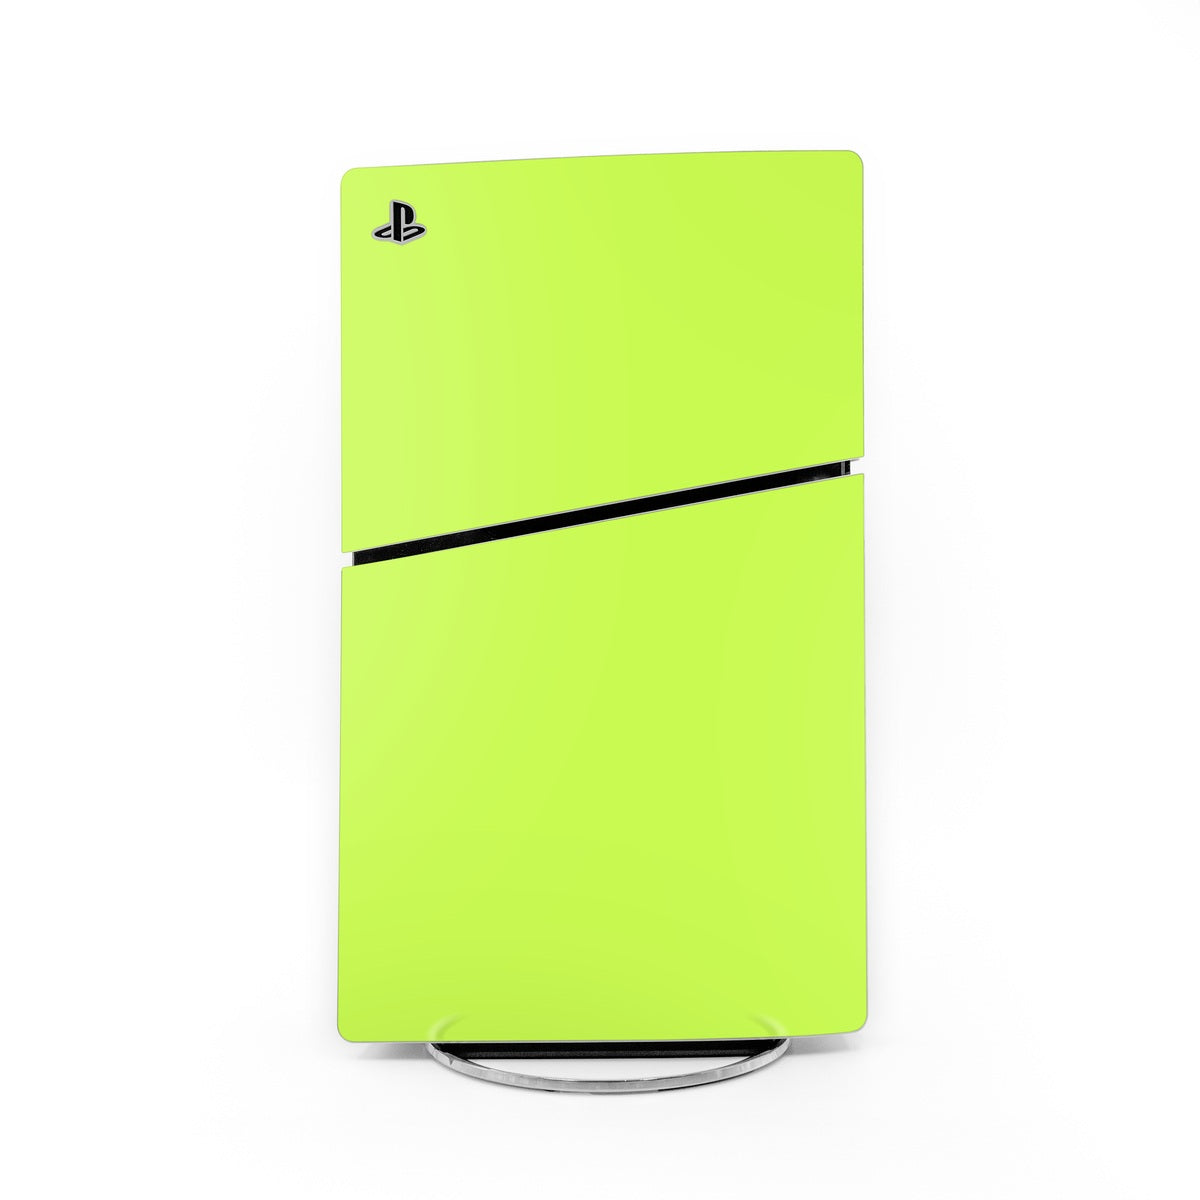 Solid State Lime - Sony PS5 Slim Skin